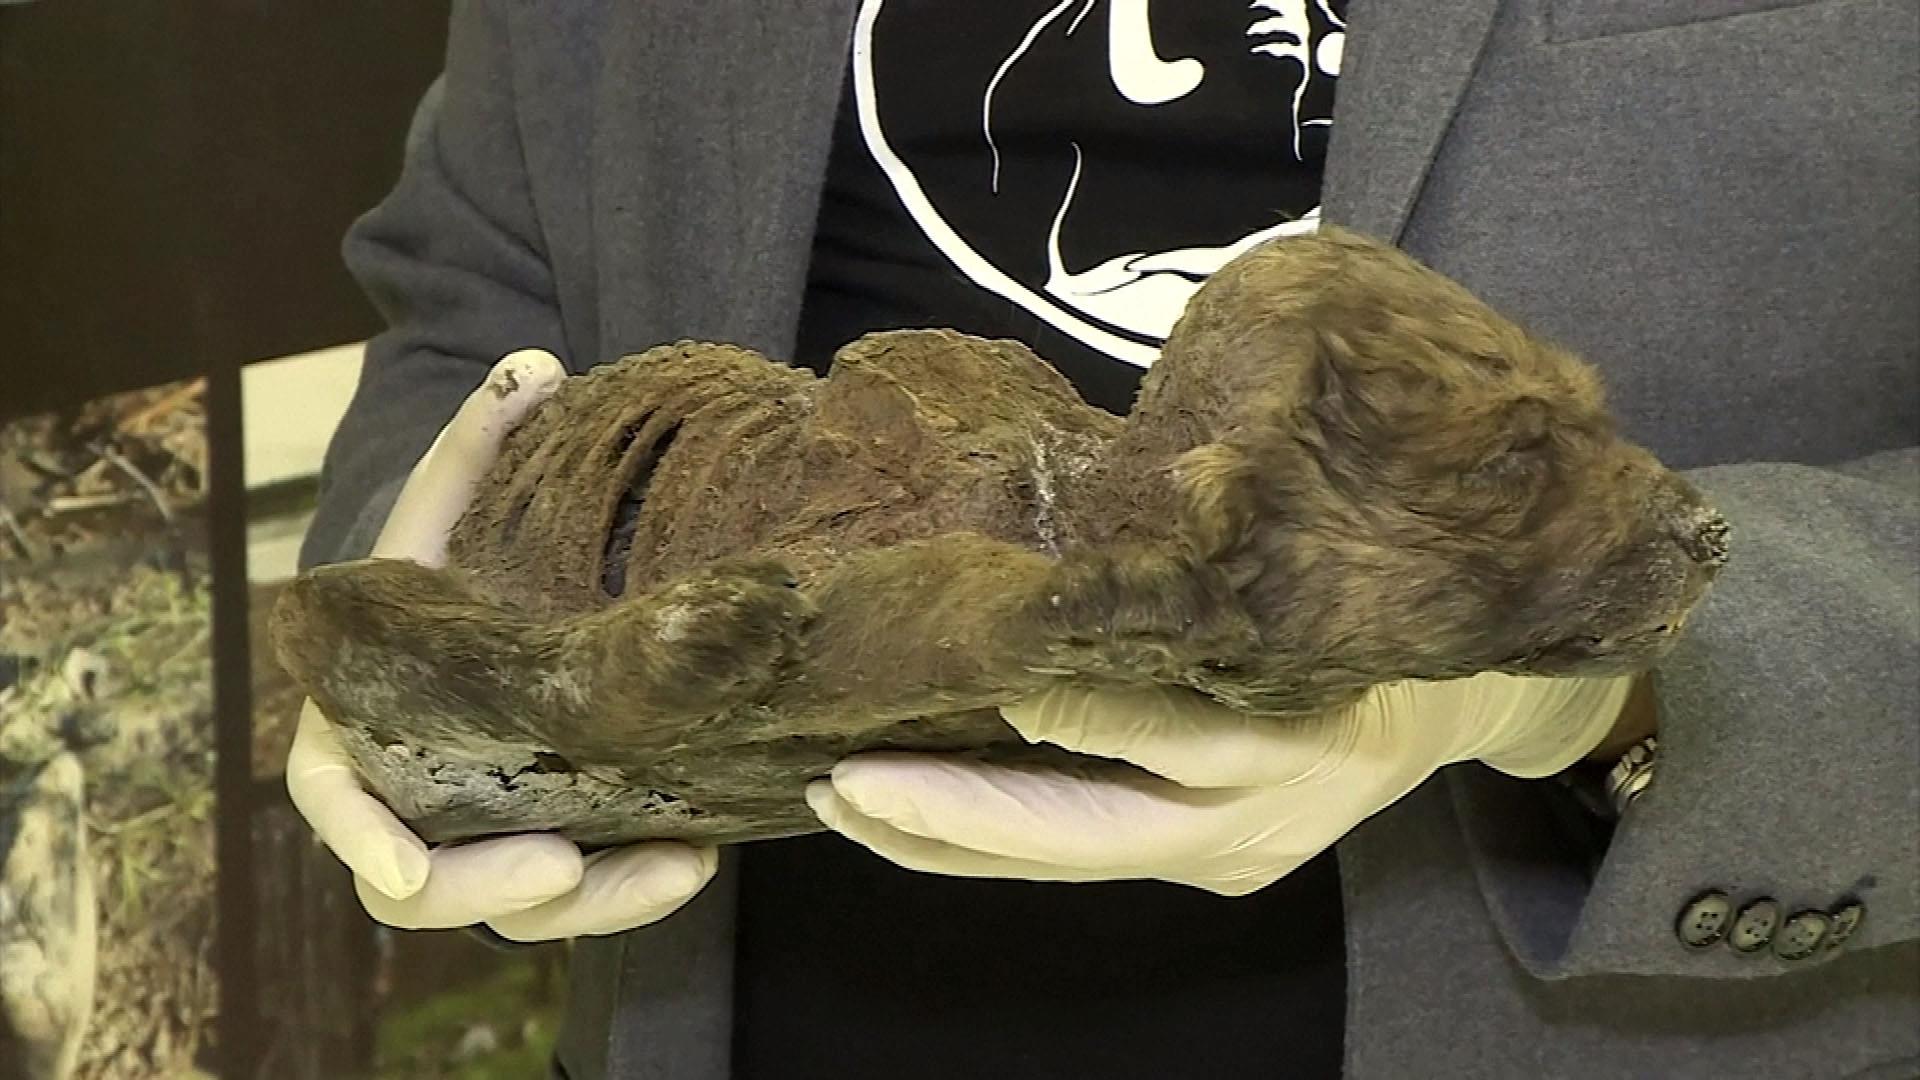 18,000-year-old puppy found remarkably preserved in permafrost